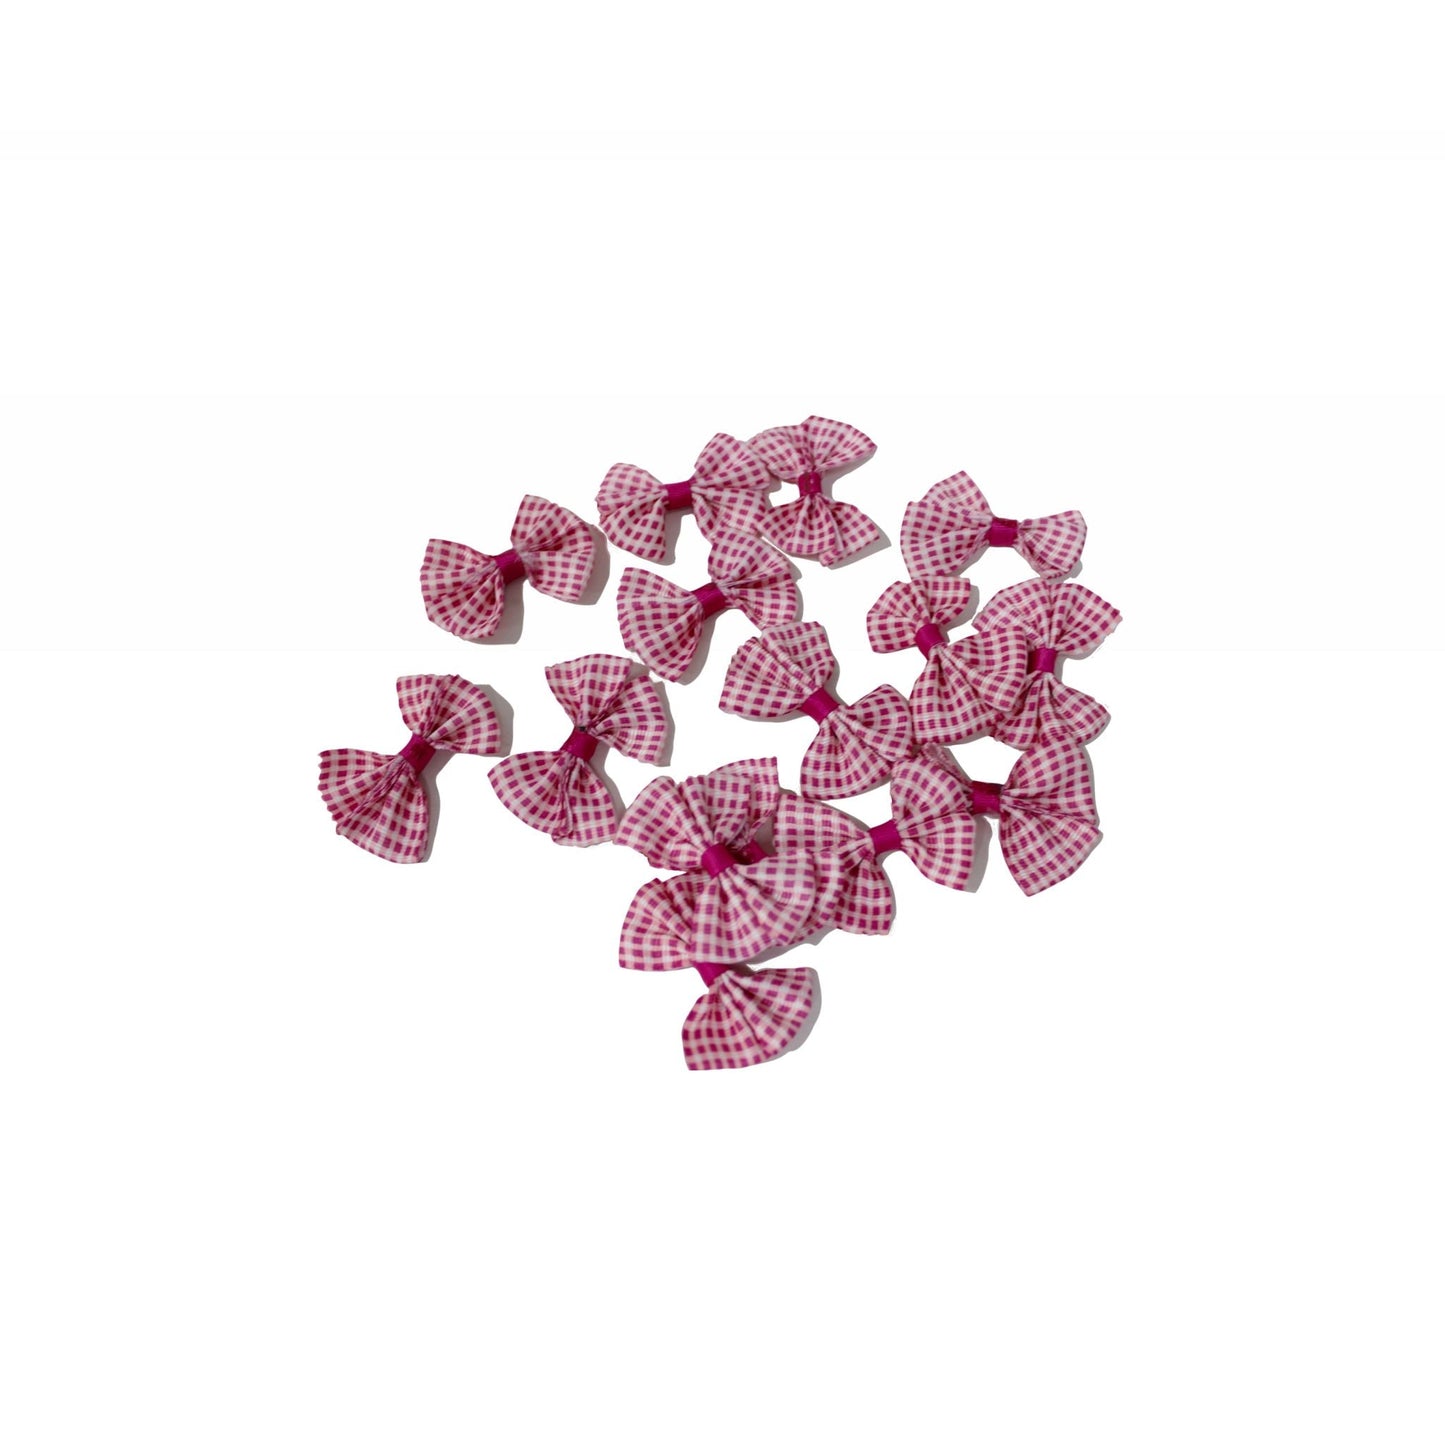 Indian Petals Checkered Ribbon Bow Cabochons Motif for Craft or Decoration - 12469, Hot Pink